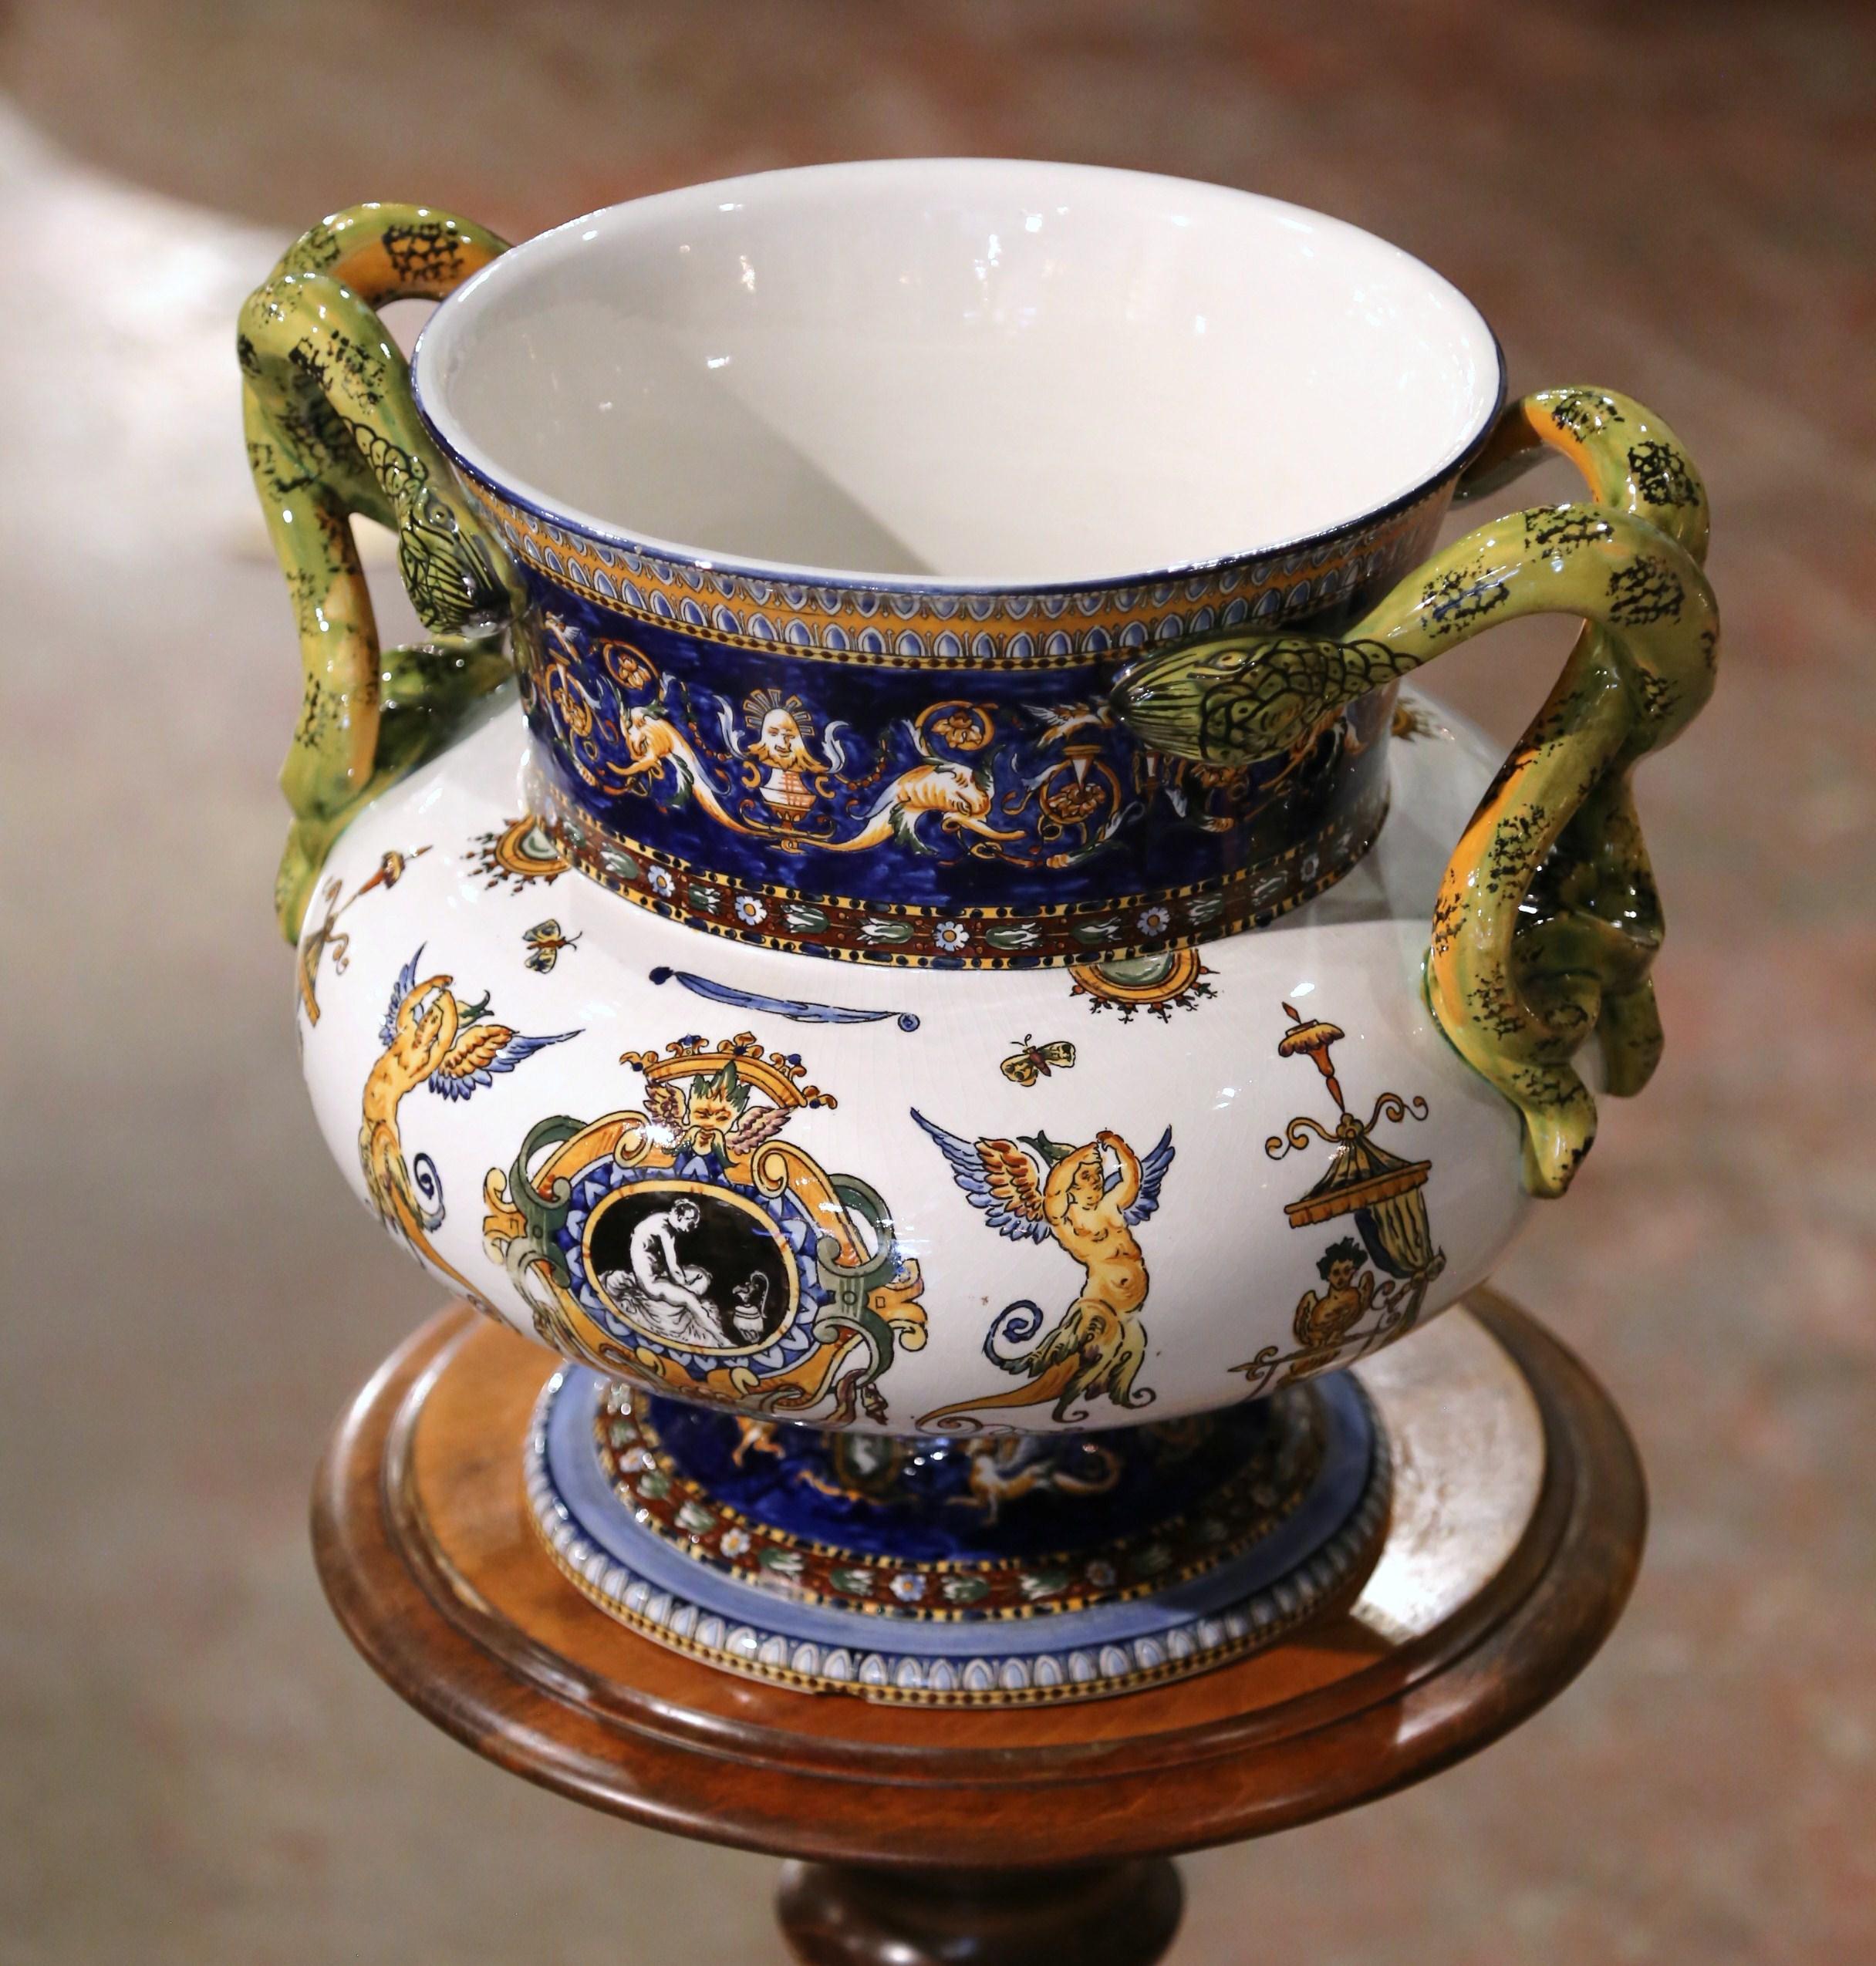 Created in France circa 1890 by the Gien factory, the antique planter is round in shape and stands on a circular base decorated with acanthus leaf motifs. The large cache pot features two twisted snake handles over the colorful rim and wide neck.